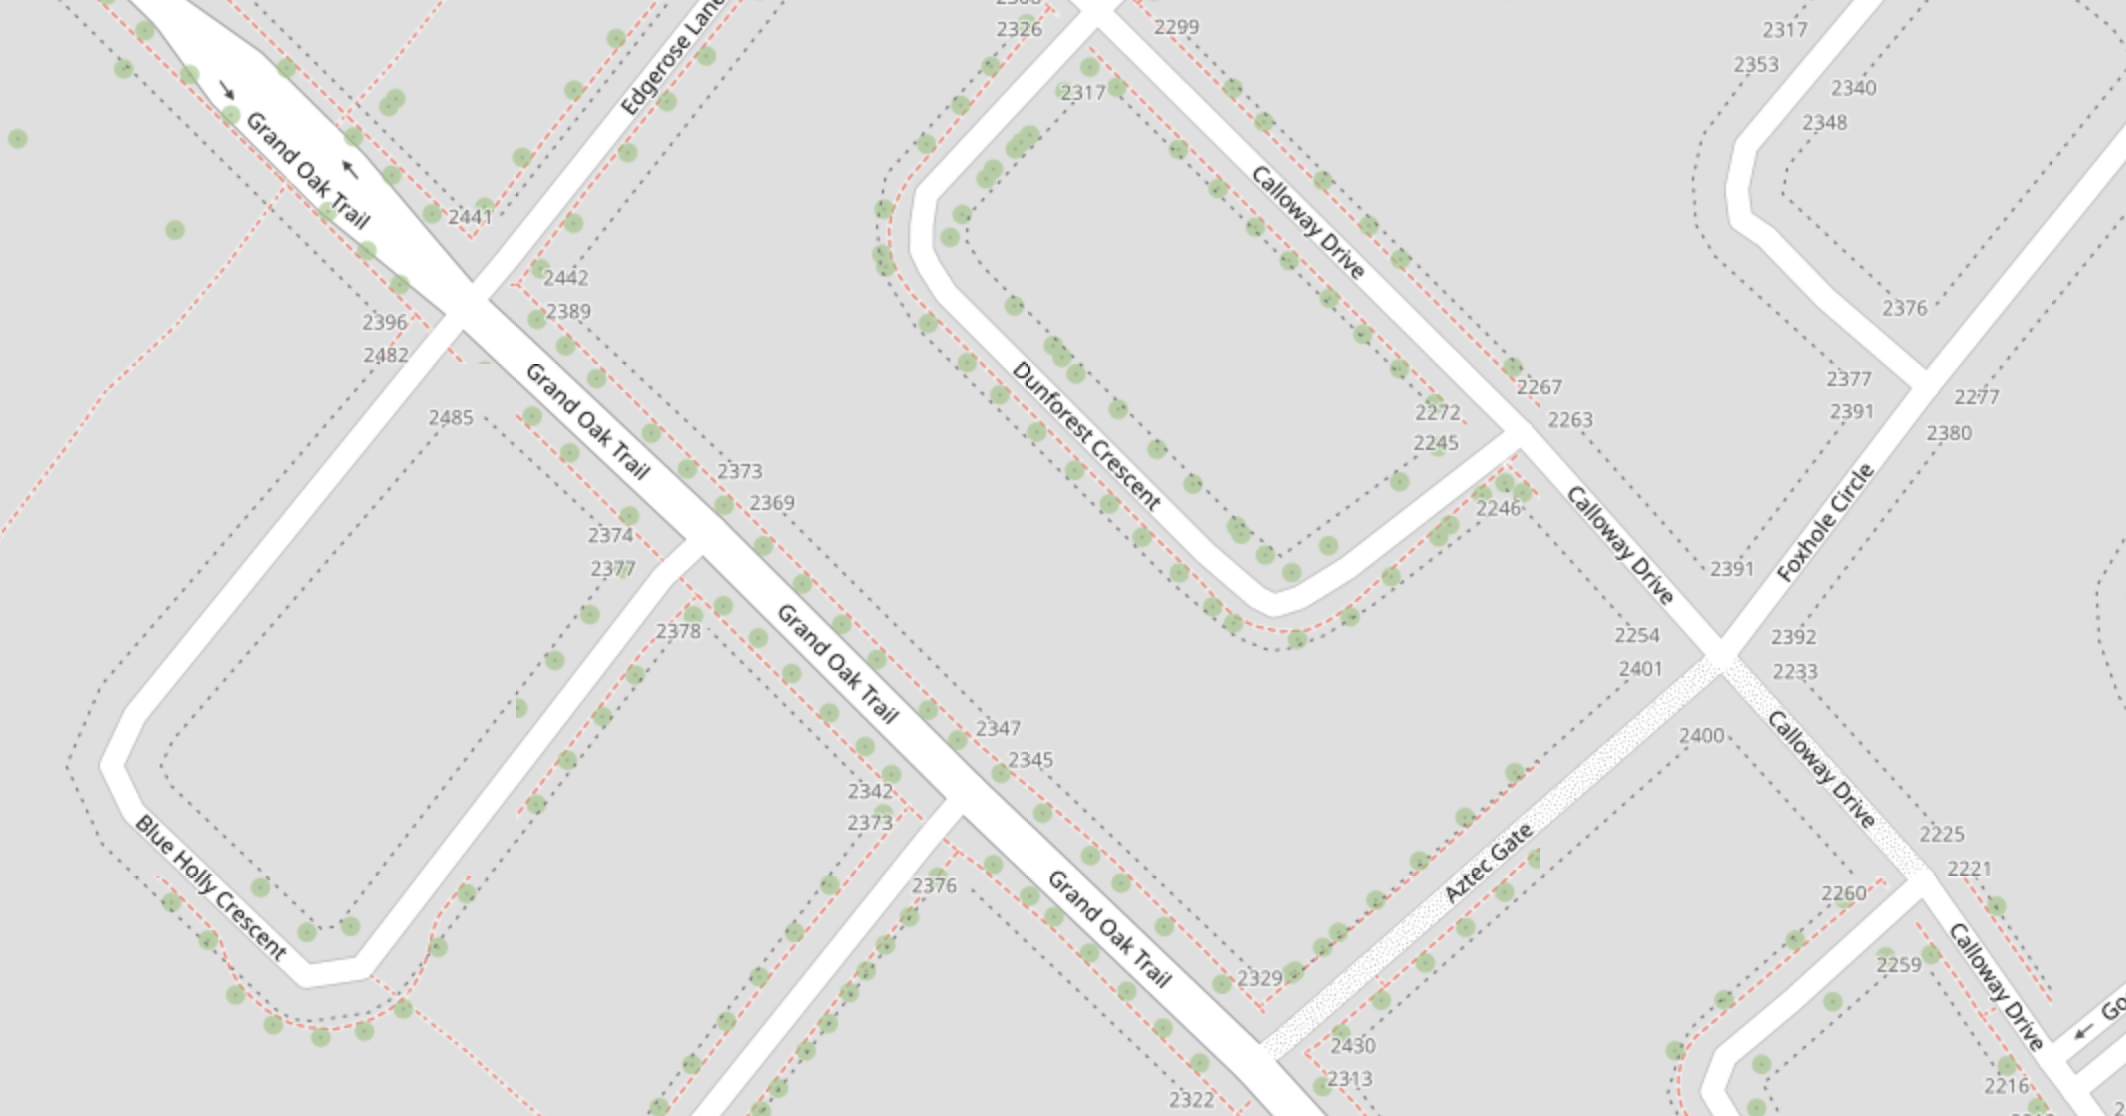 The residence on Dunforest Crescent | Openstreetmap